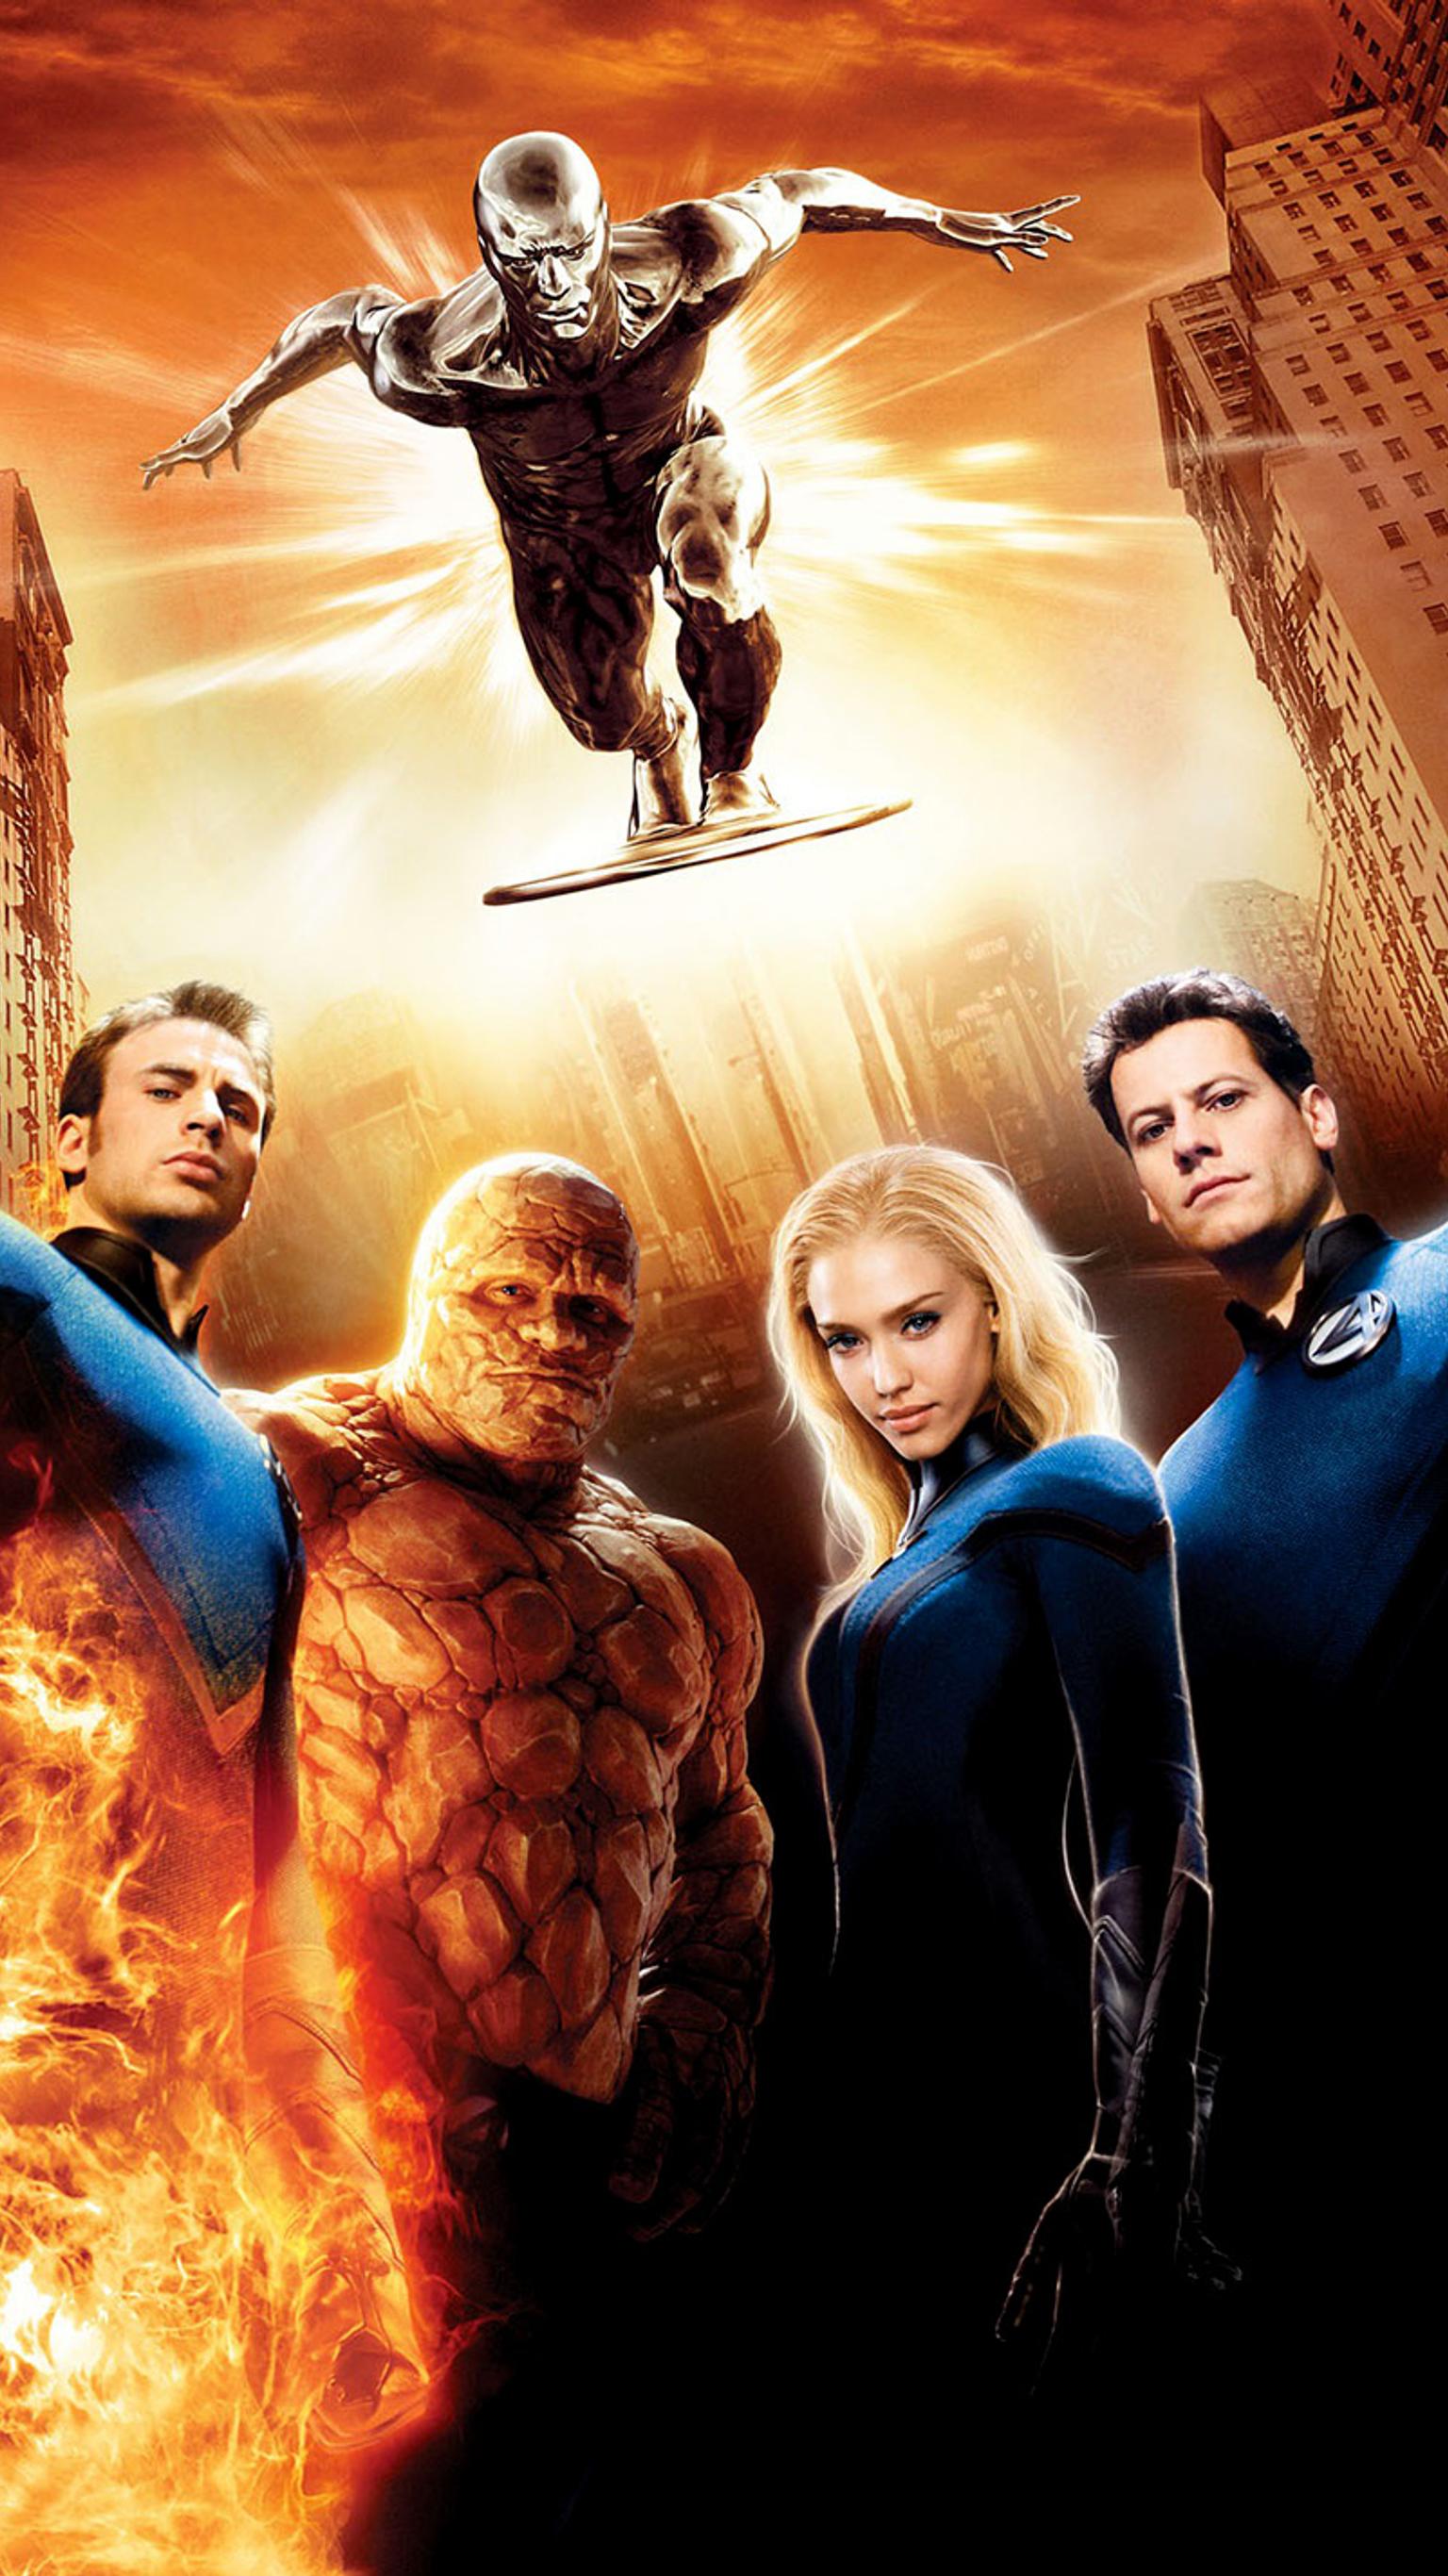 Fantastic four movie iphone wallpapers